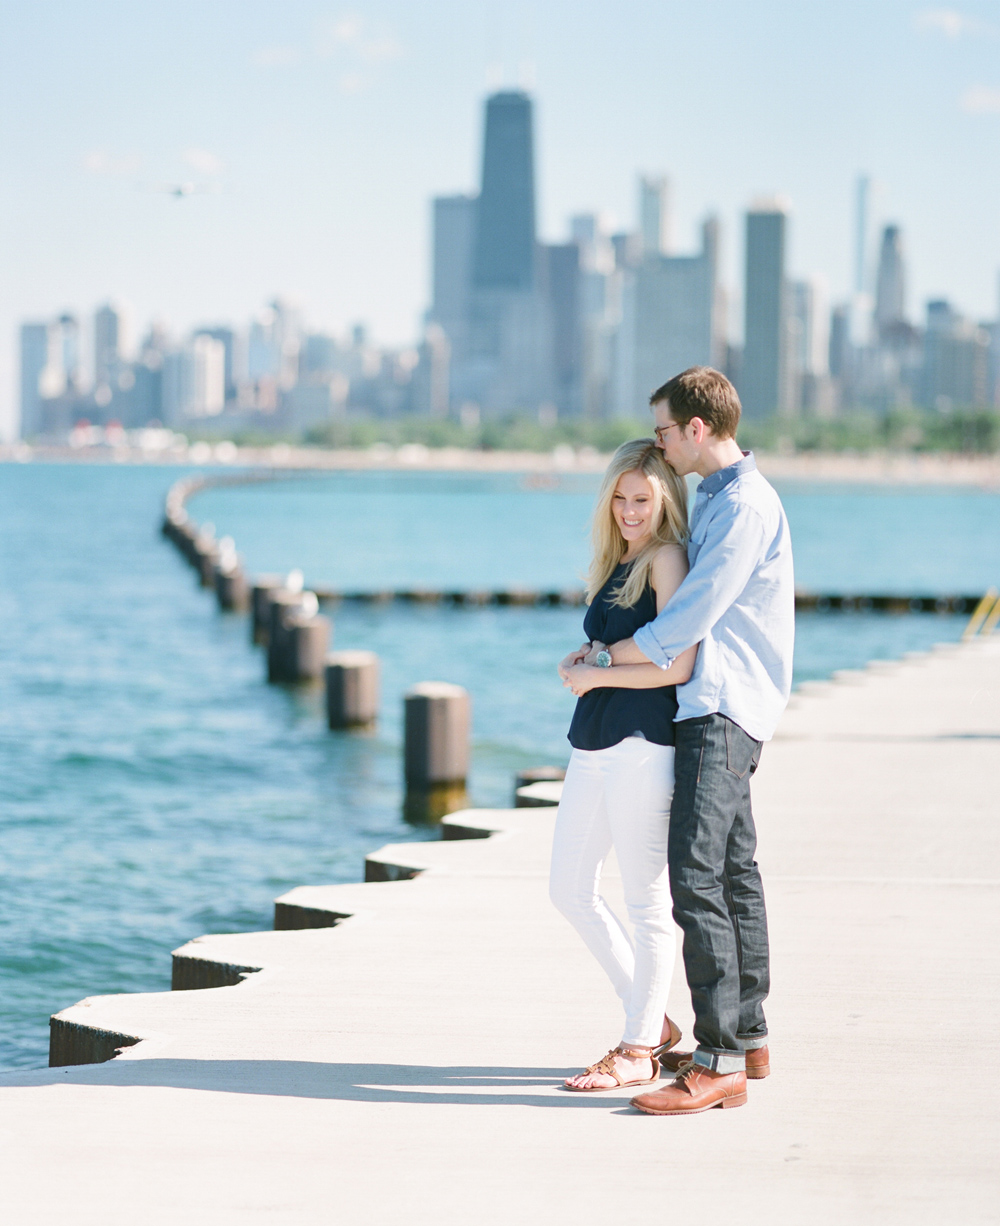 Chicago_Engagement_Photography_Lincoln_Park_011.jpg